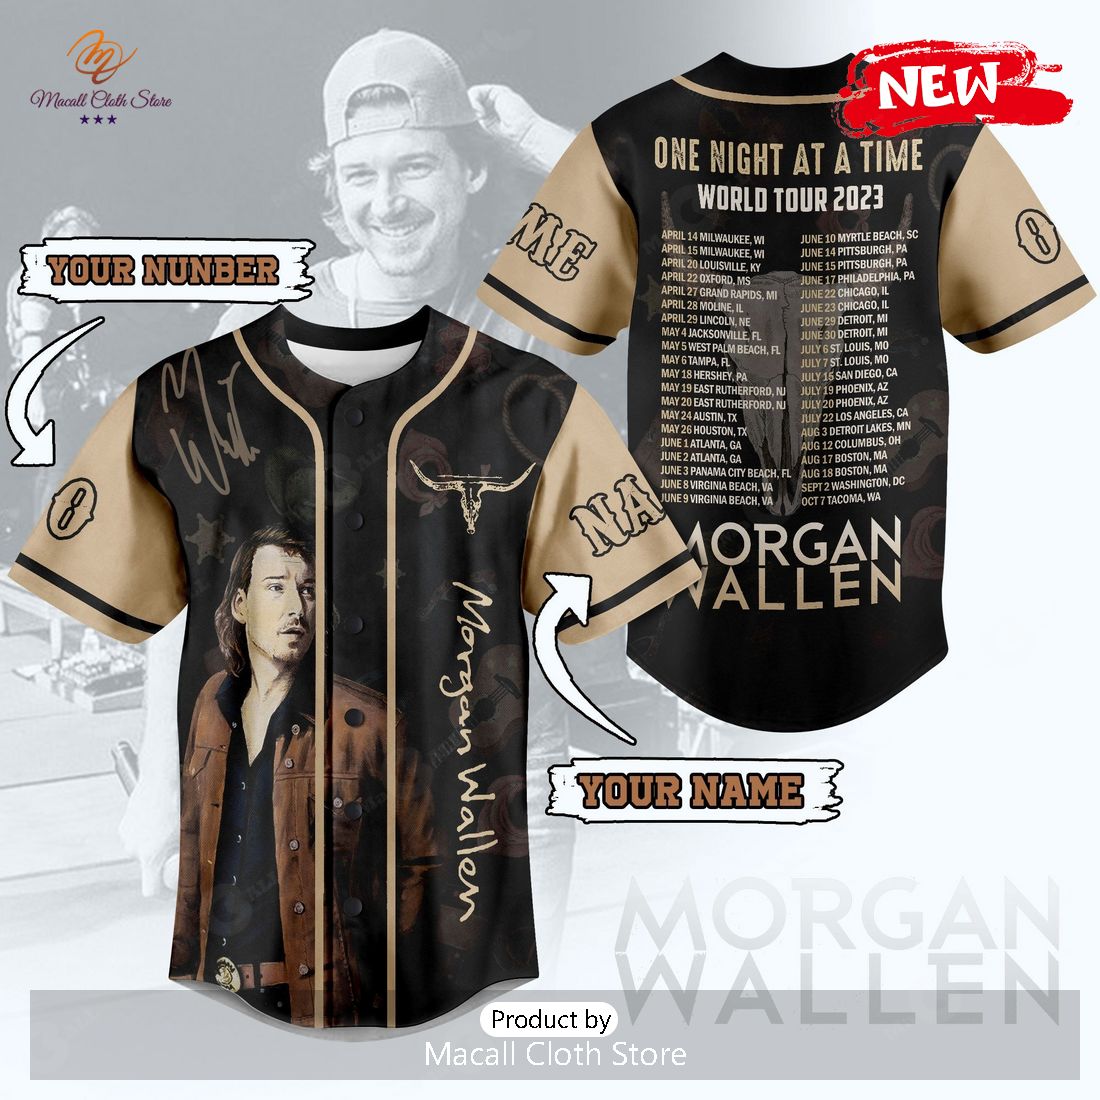 Morgan Wallen One Night At A Time World Tour Personalized, 50% OFF